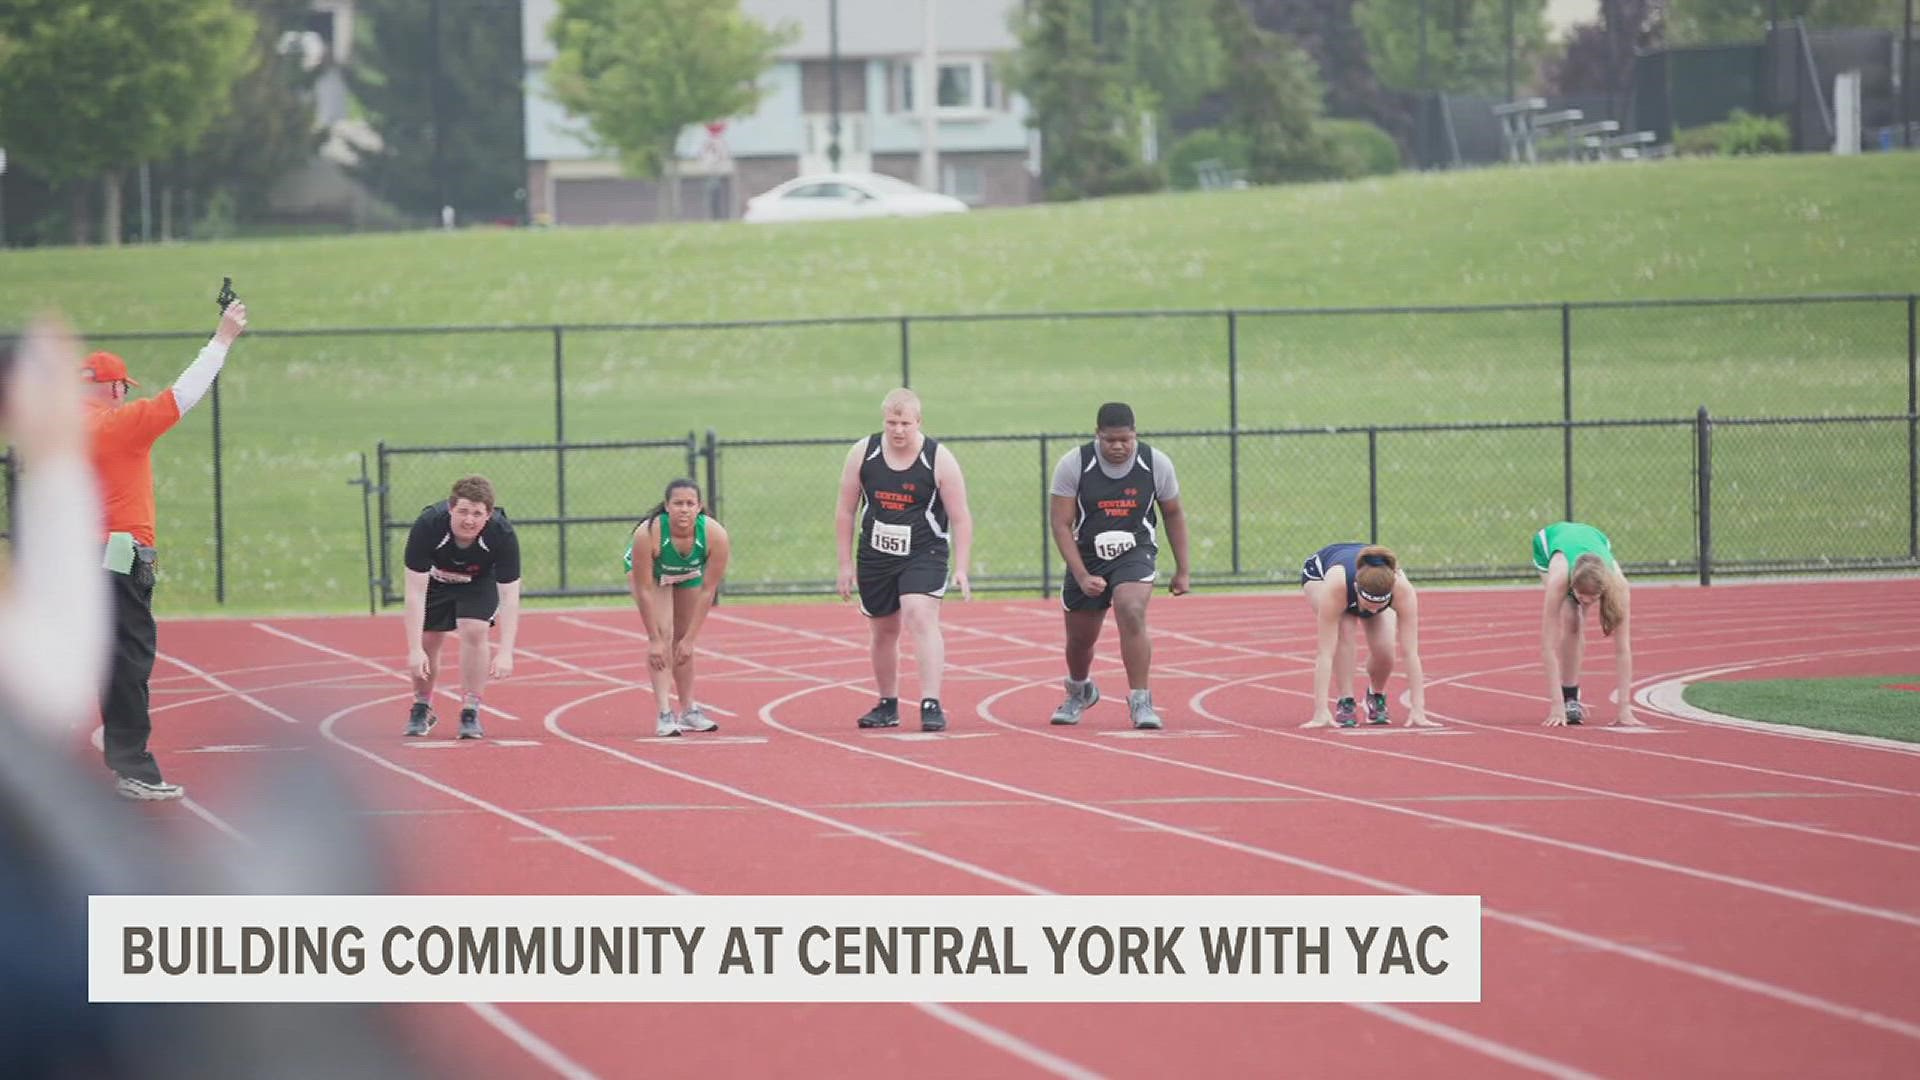 The student-led organization, which is affiliated with Special Olympics, creates a space for students of all abilities to connect, play sports, and more.